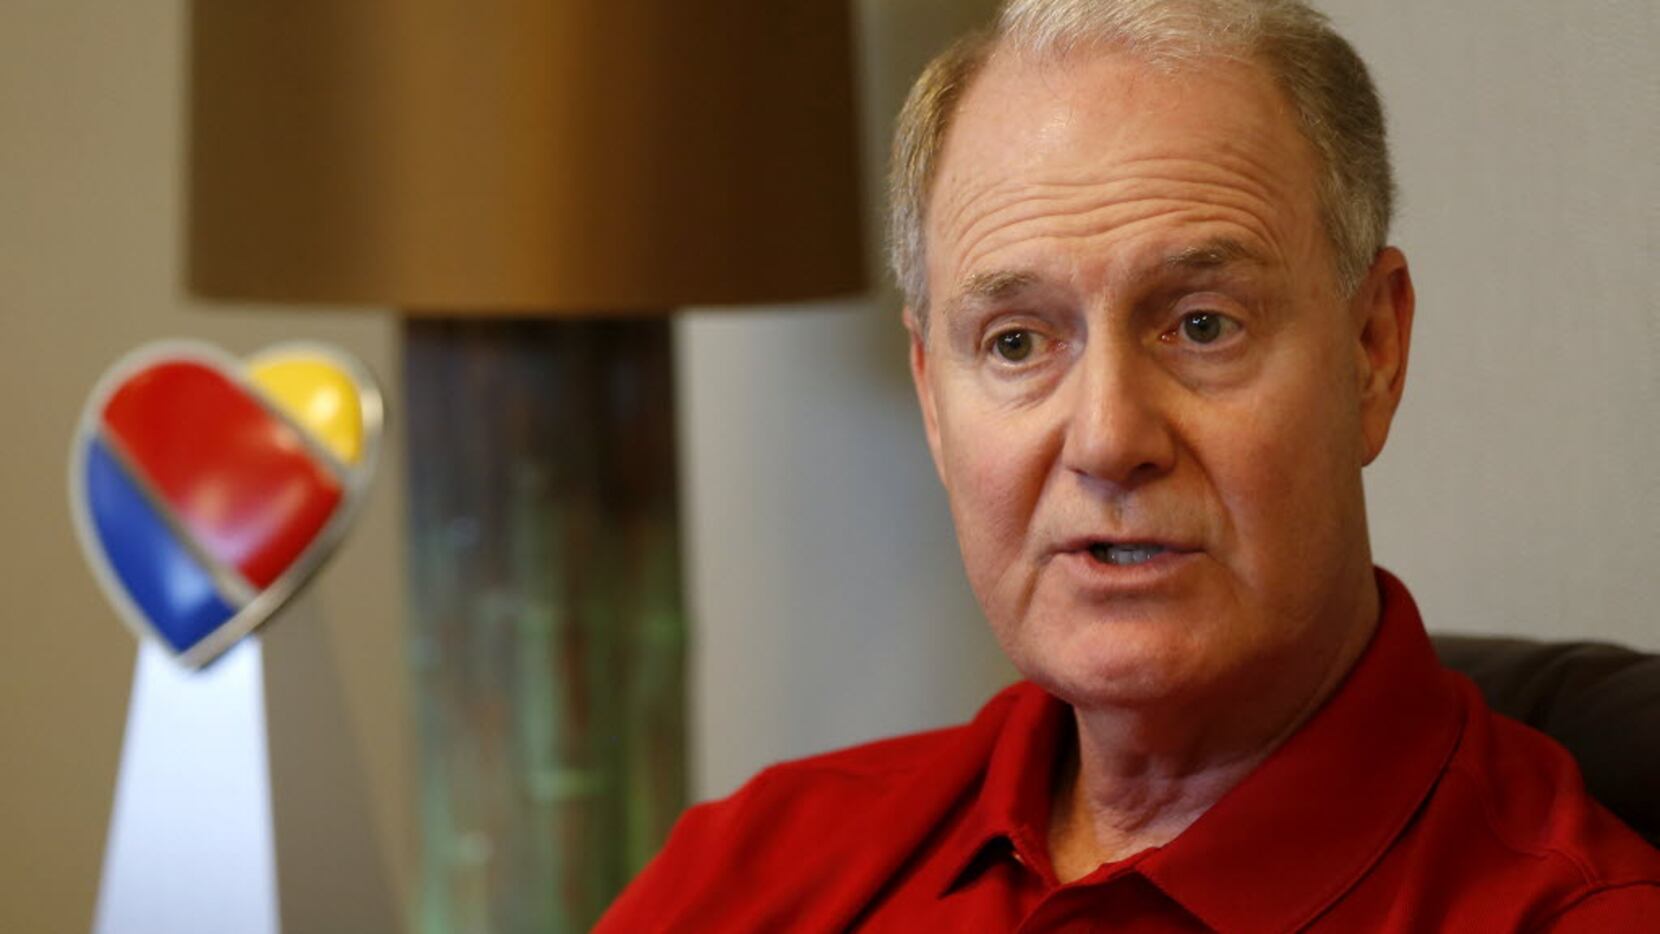 Southwest Airlines CEO Gary C. Kelly discusses the faulty router that resulted in thousands...